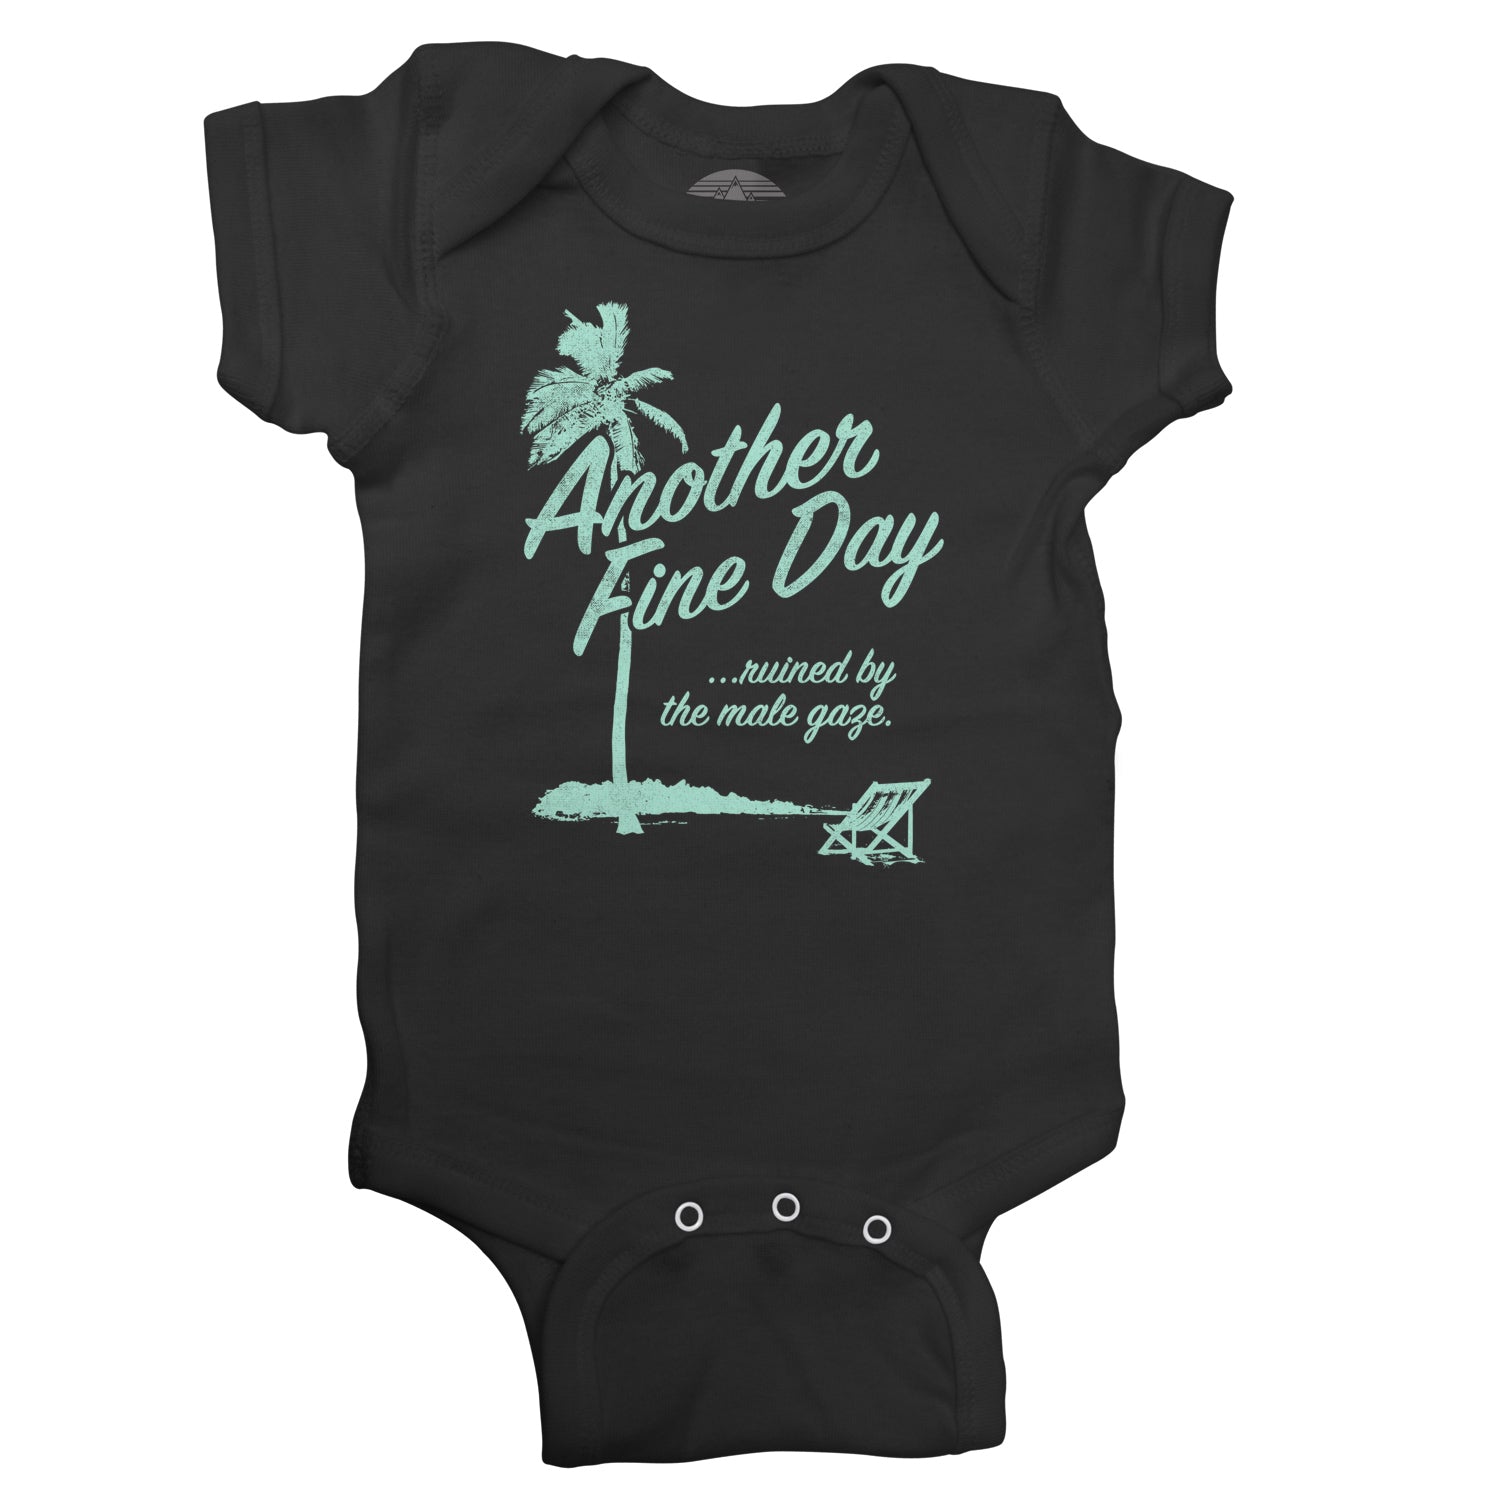 Another Fine Day Ruined by the Male Gaze Infant Bodysuit - Unisex Fit